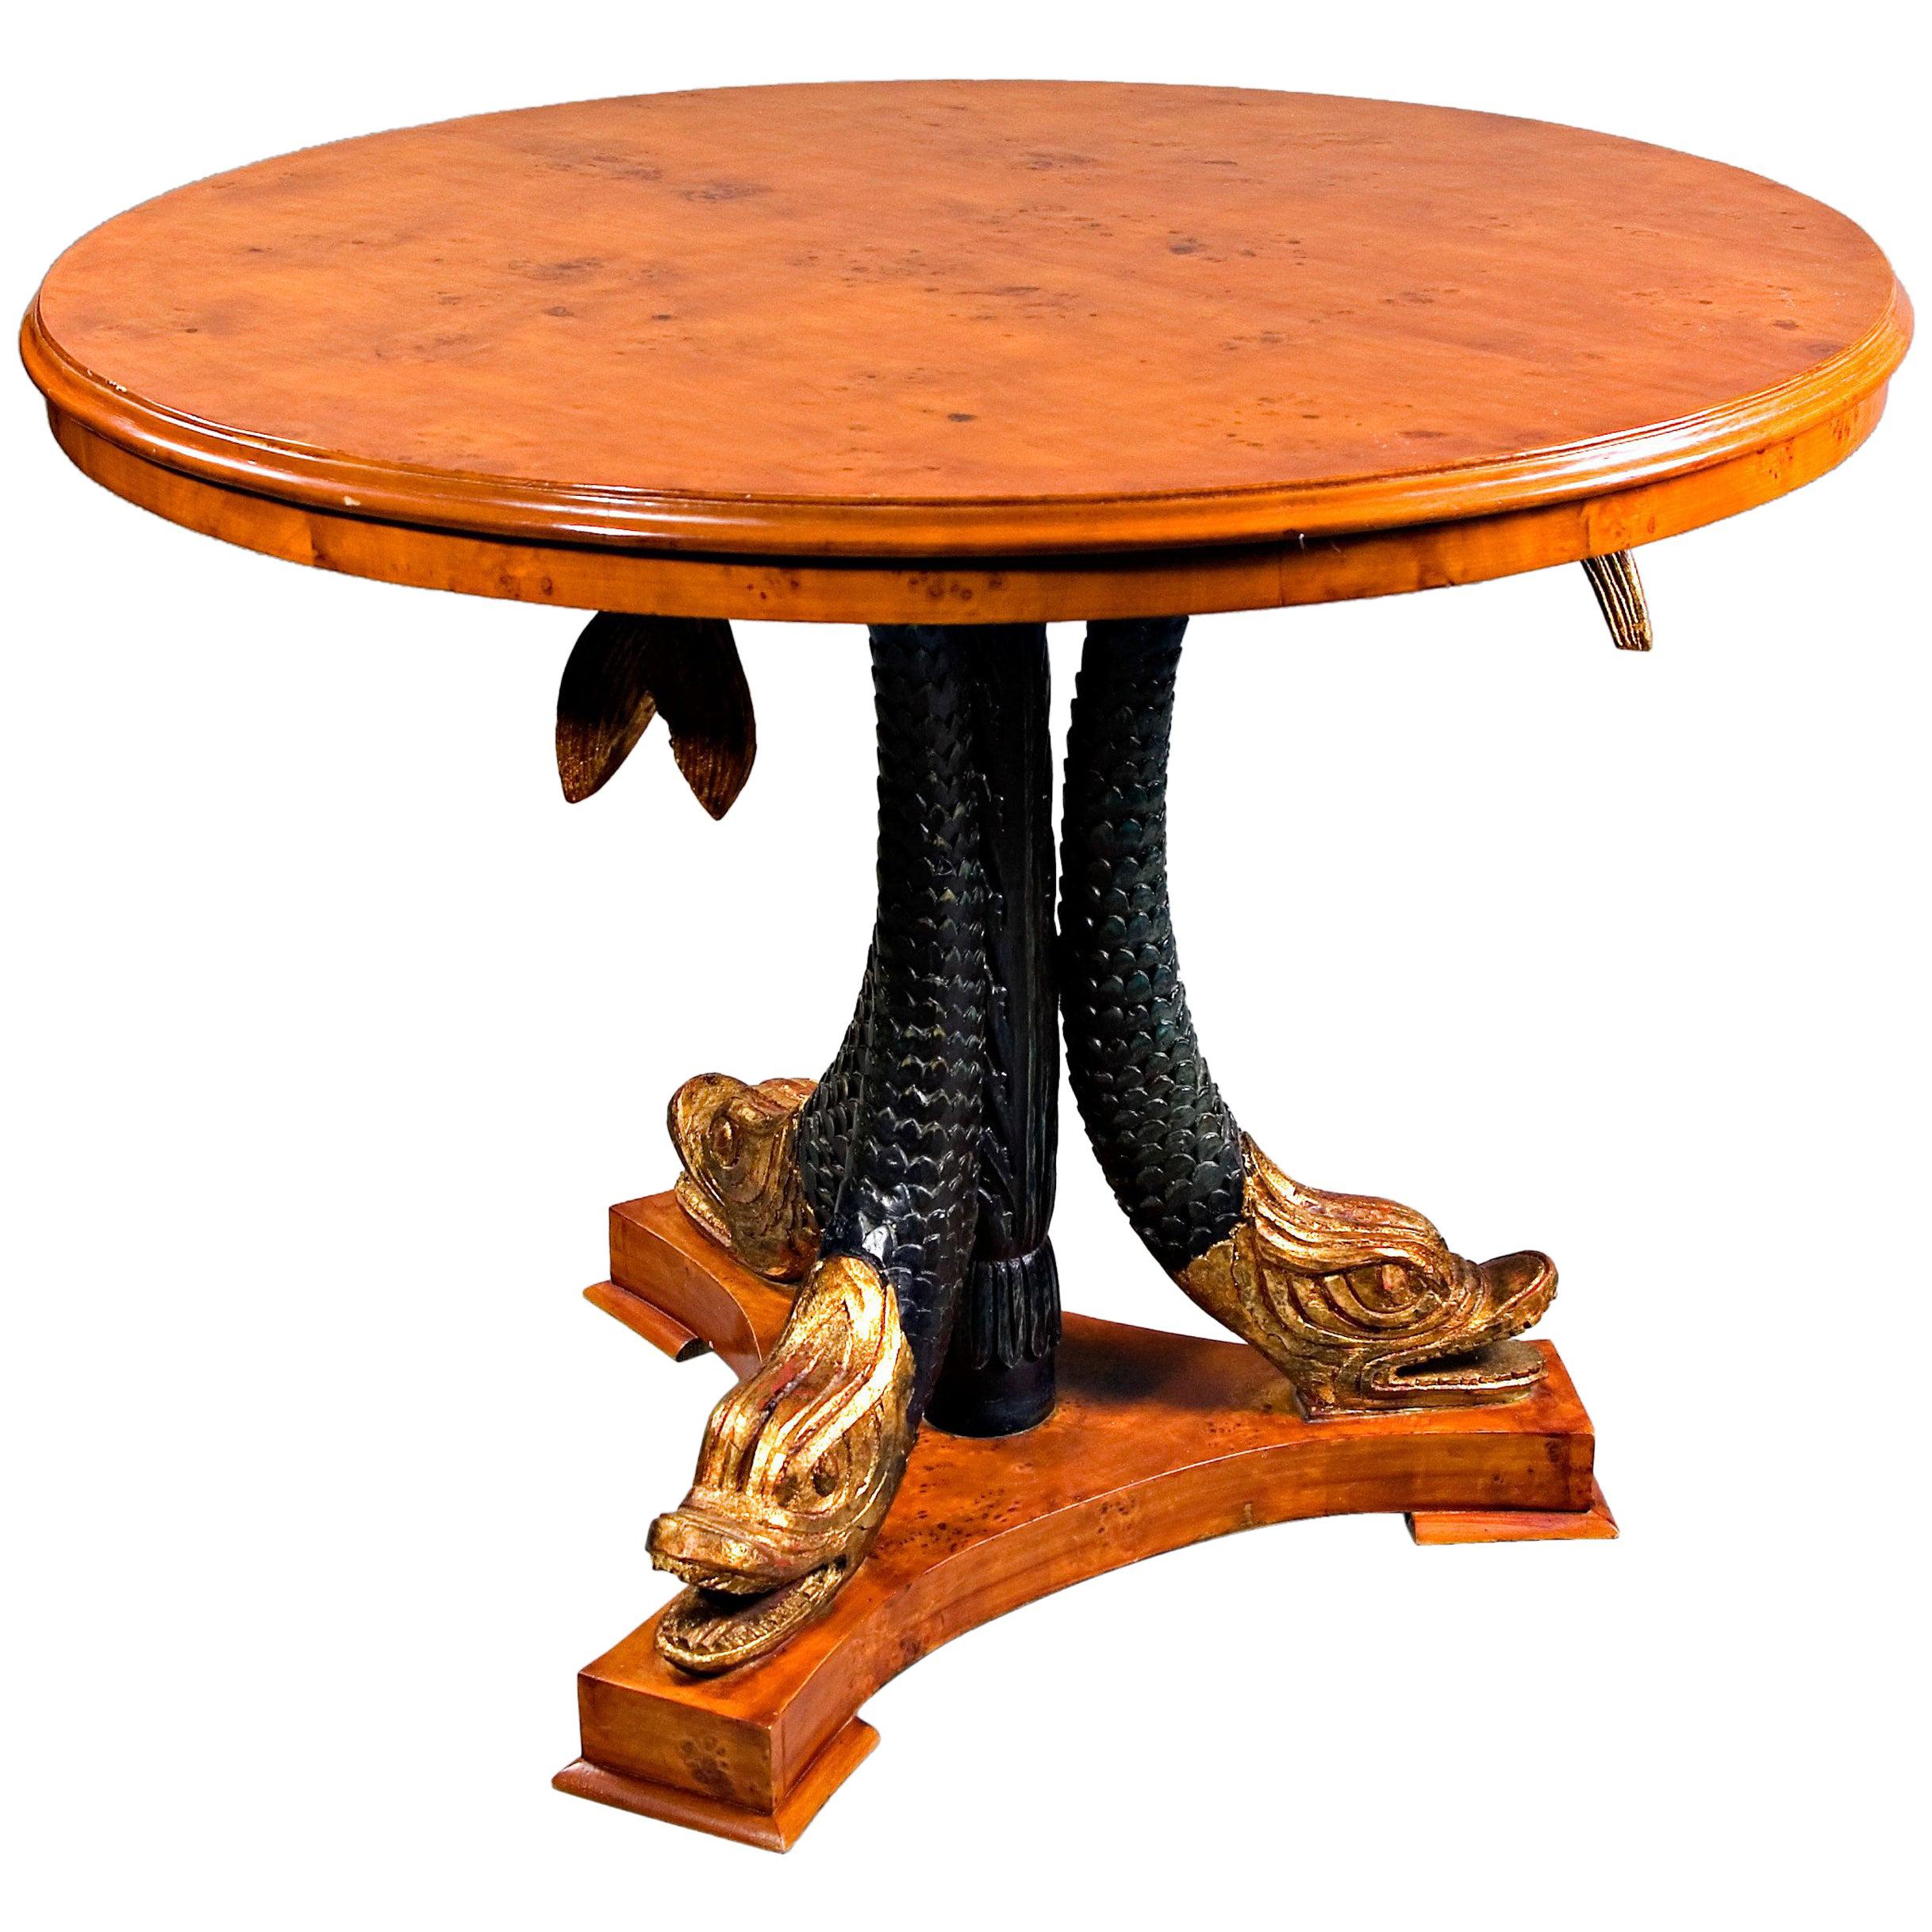 20th Century Primal Table with Carved Dolphins Antique Empire Style Maple veneer